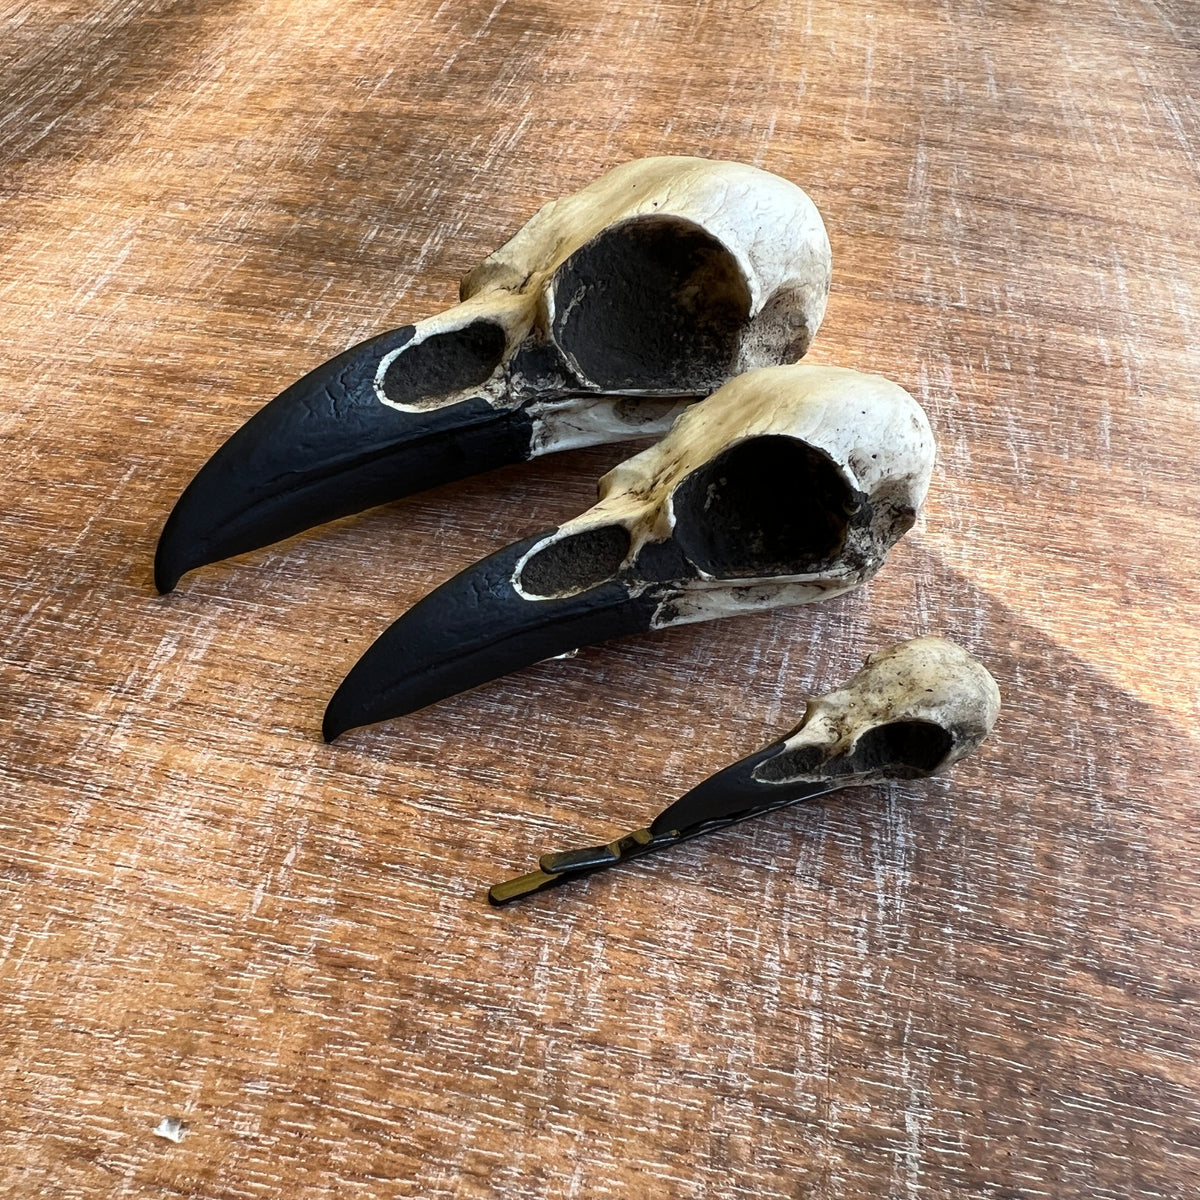 Skull bride Halloween woodland animal skull bone jewelry rave skull hair clip pins made out of resin by artist Raven Ranch Studio.